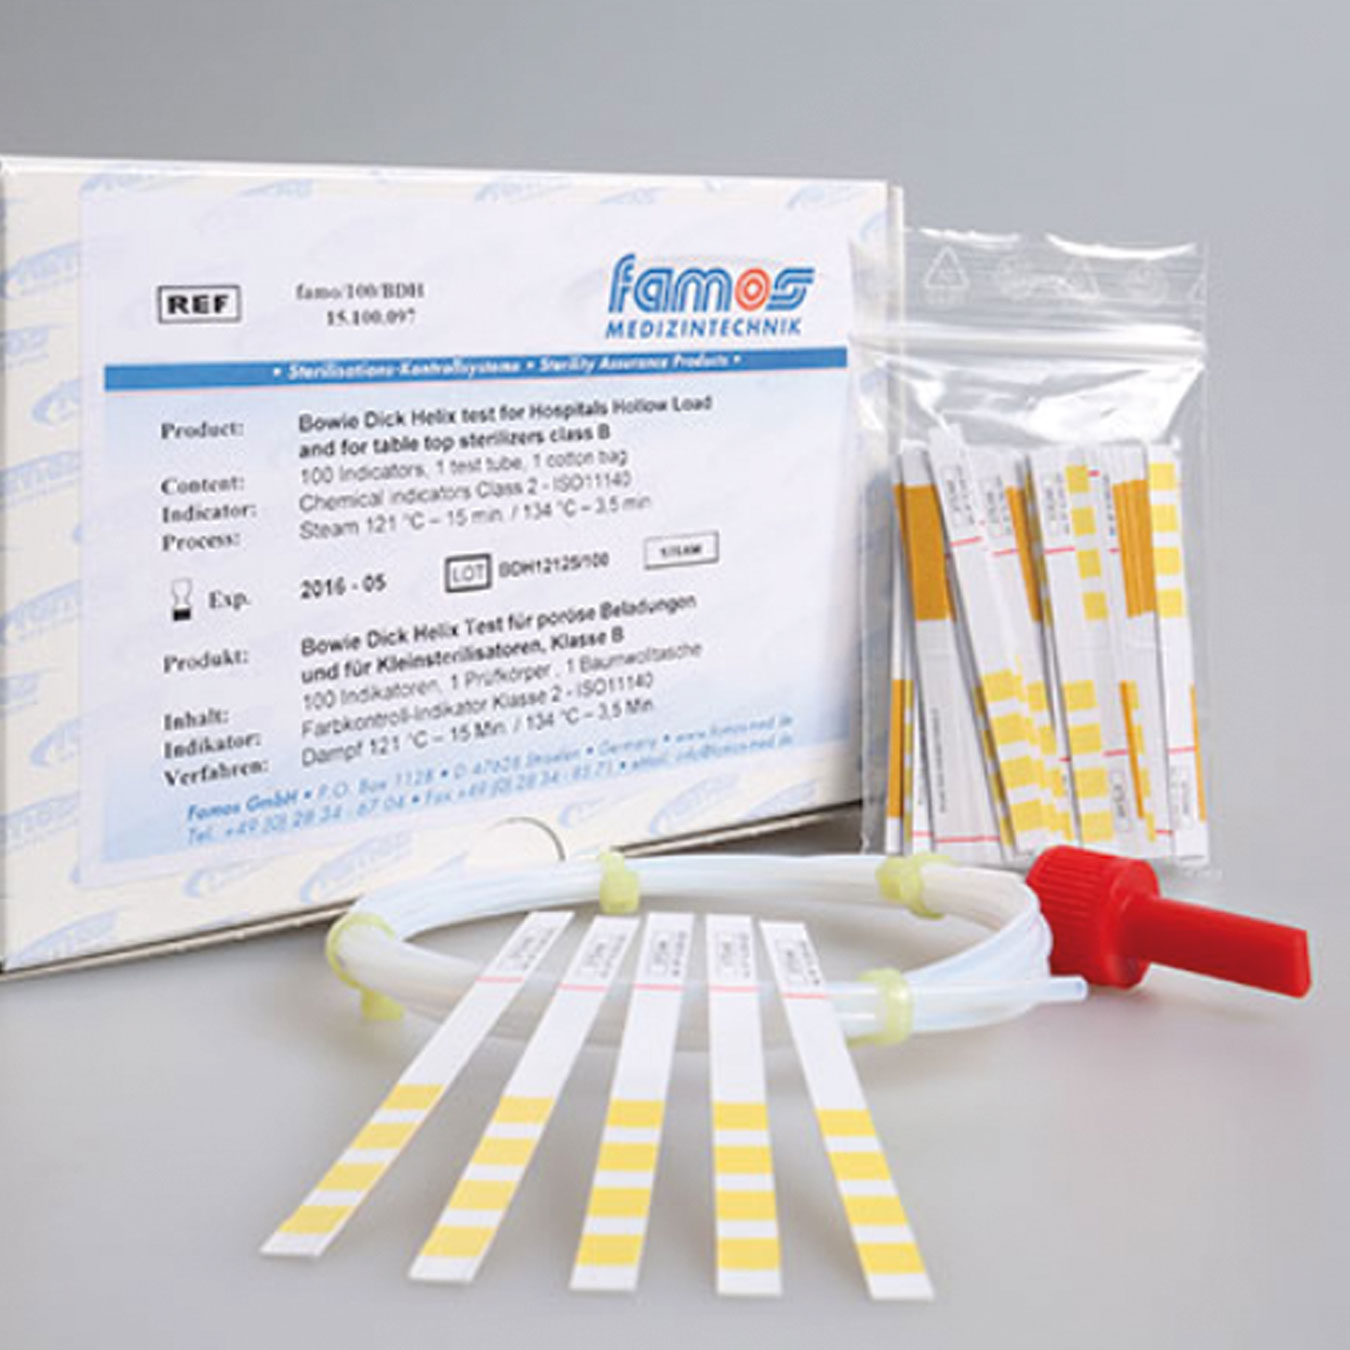 Famos Bowie-Dick Helix Test Refill Pack (Class B) image 0